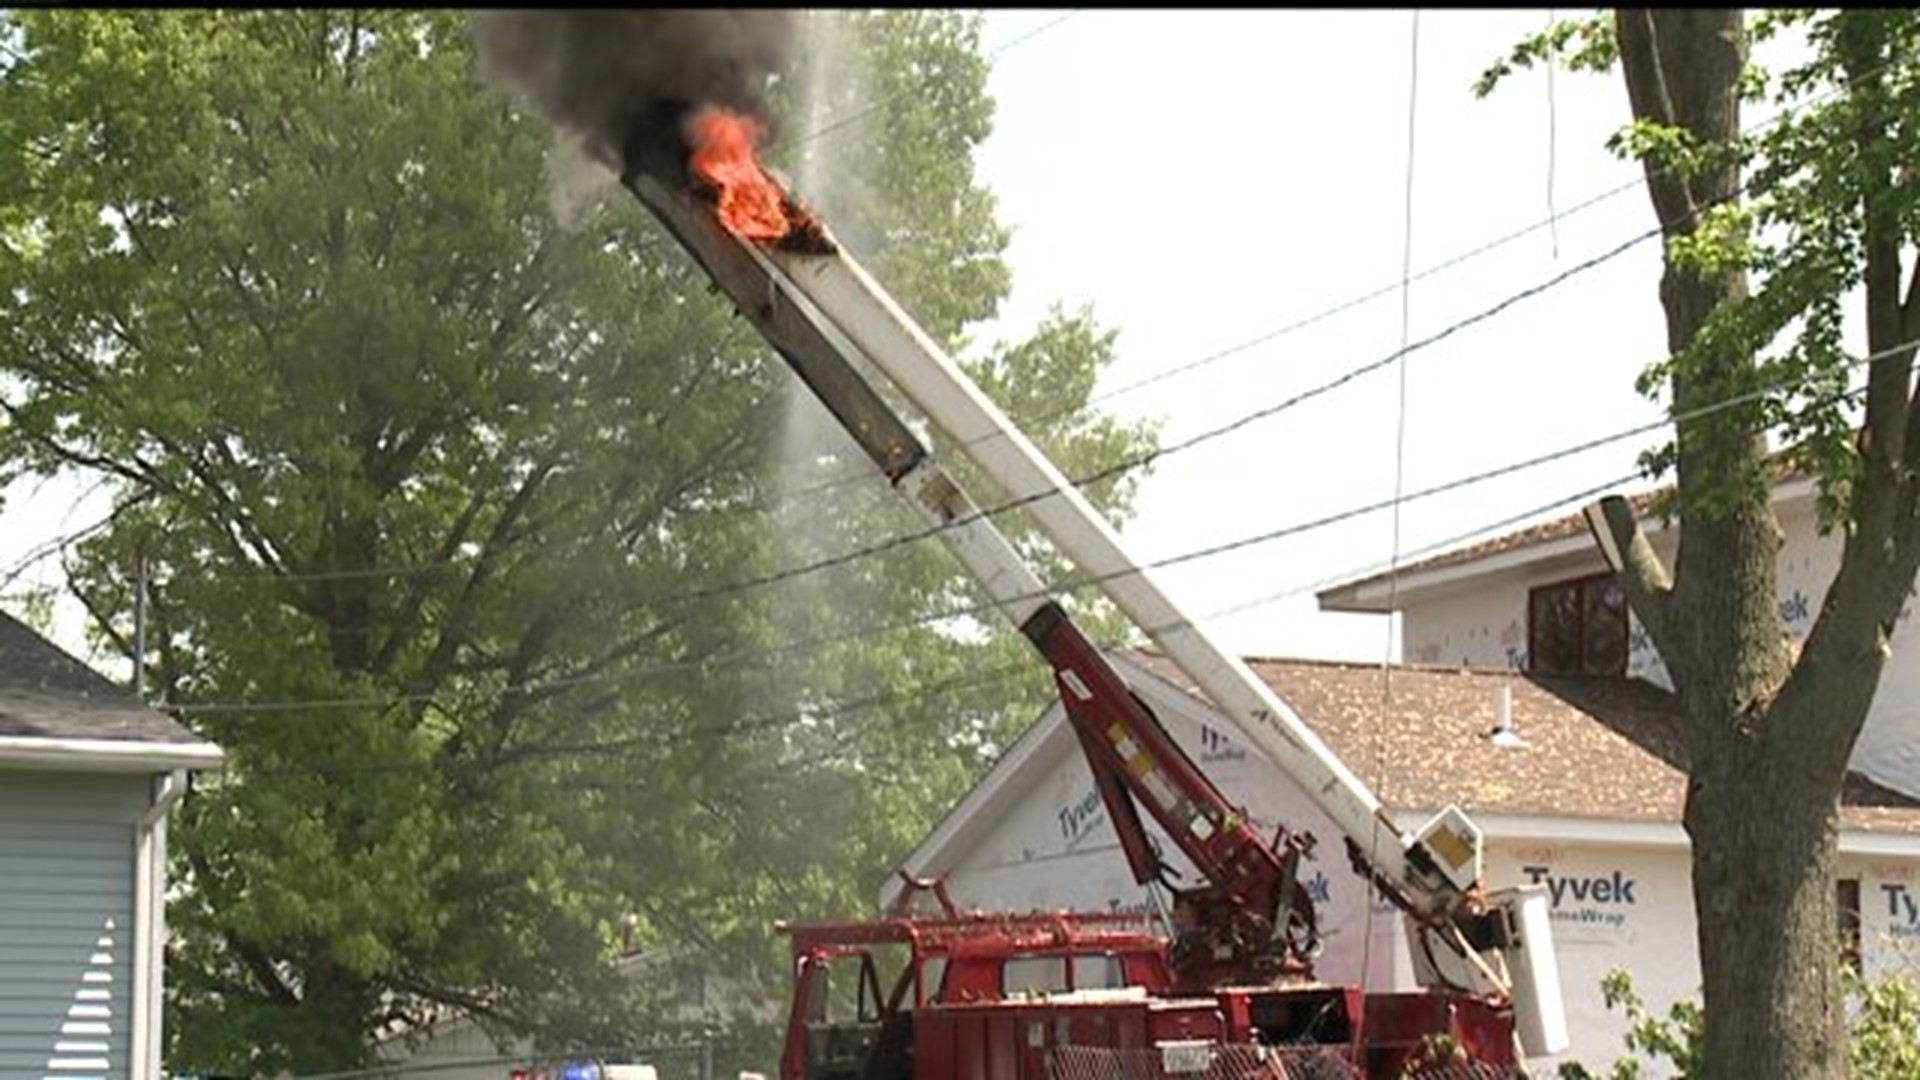 Worker shocked and small fire ignites when power line struck